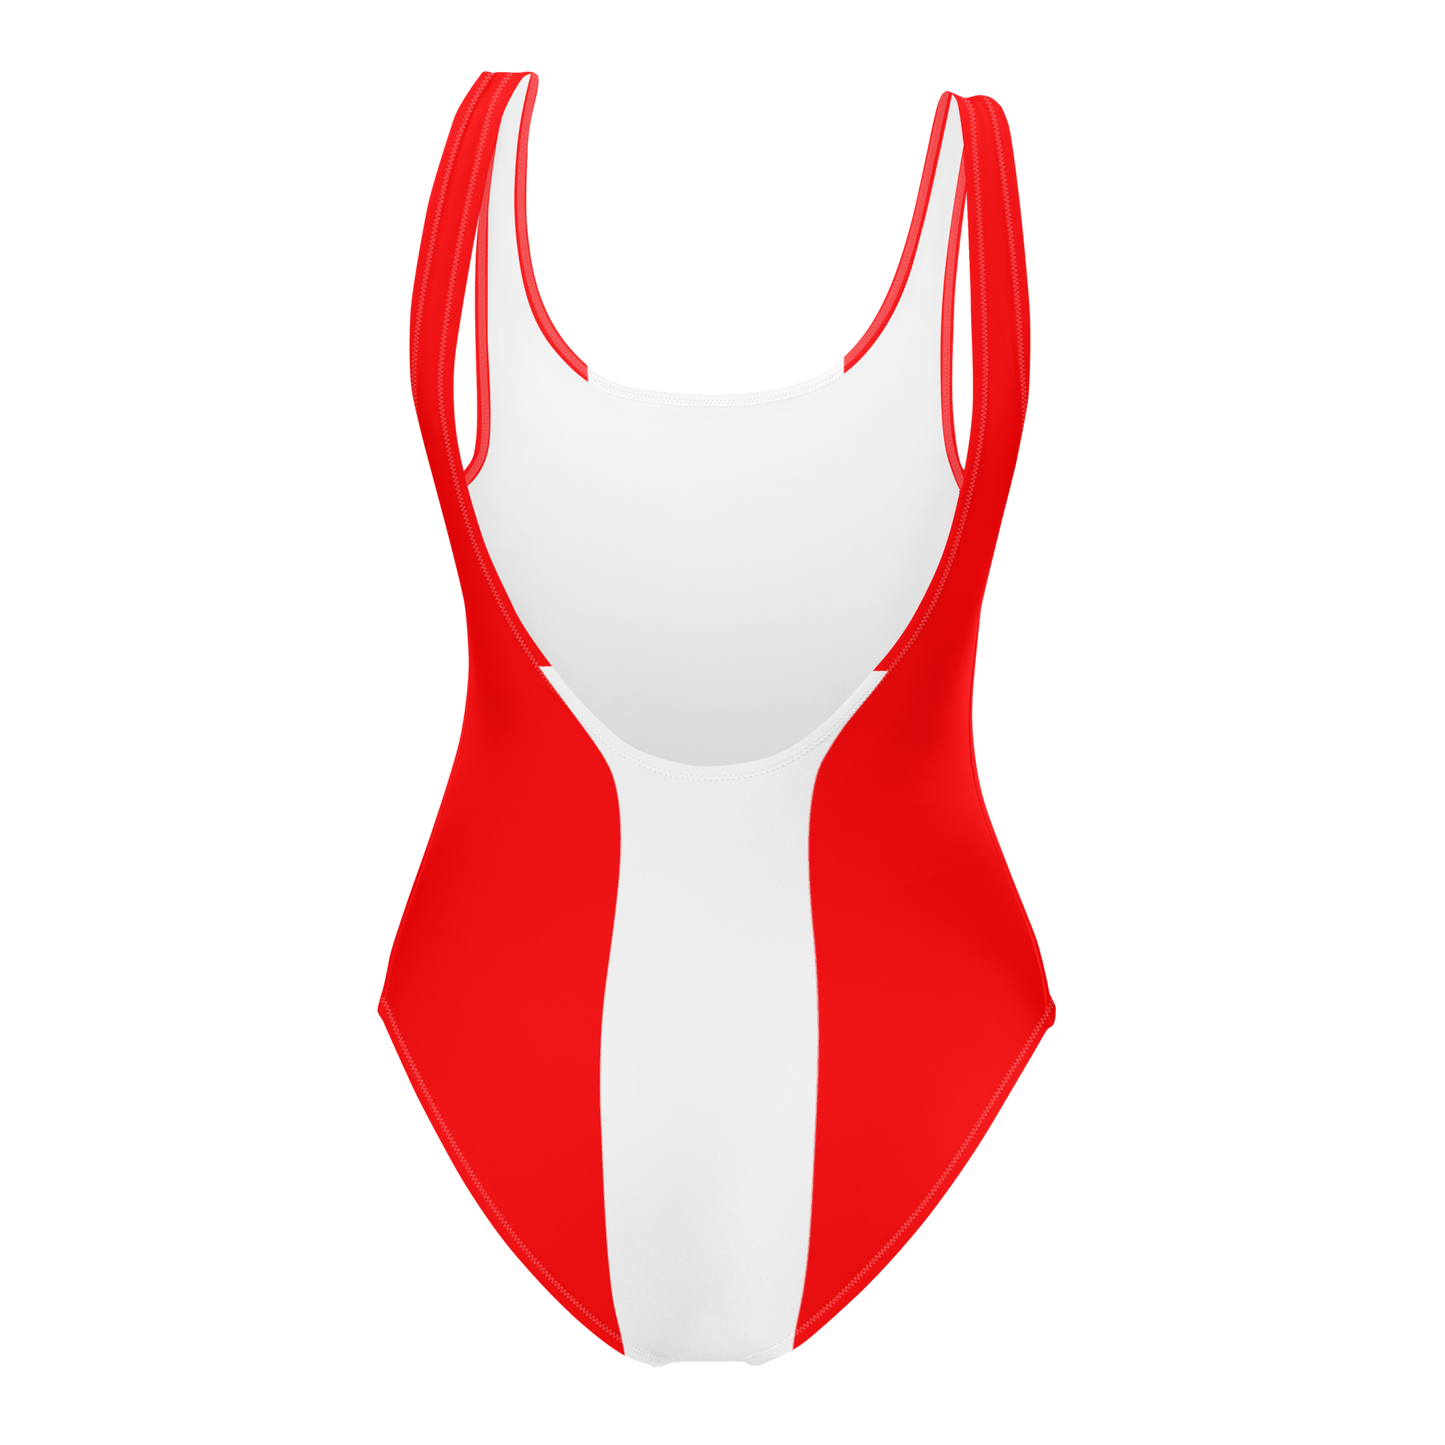 Red and White One-Piece Swimsuit